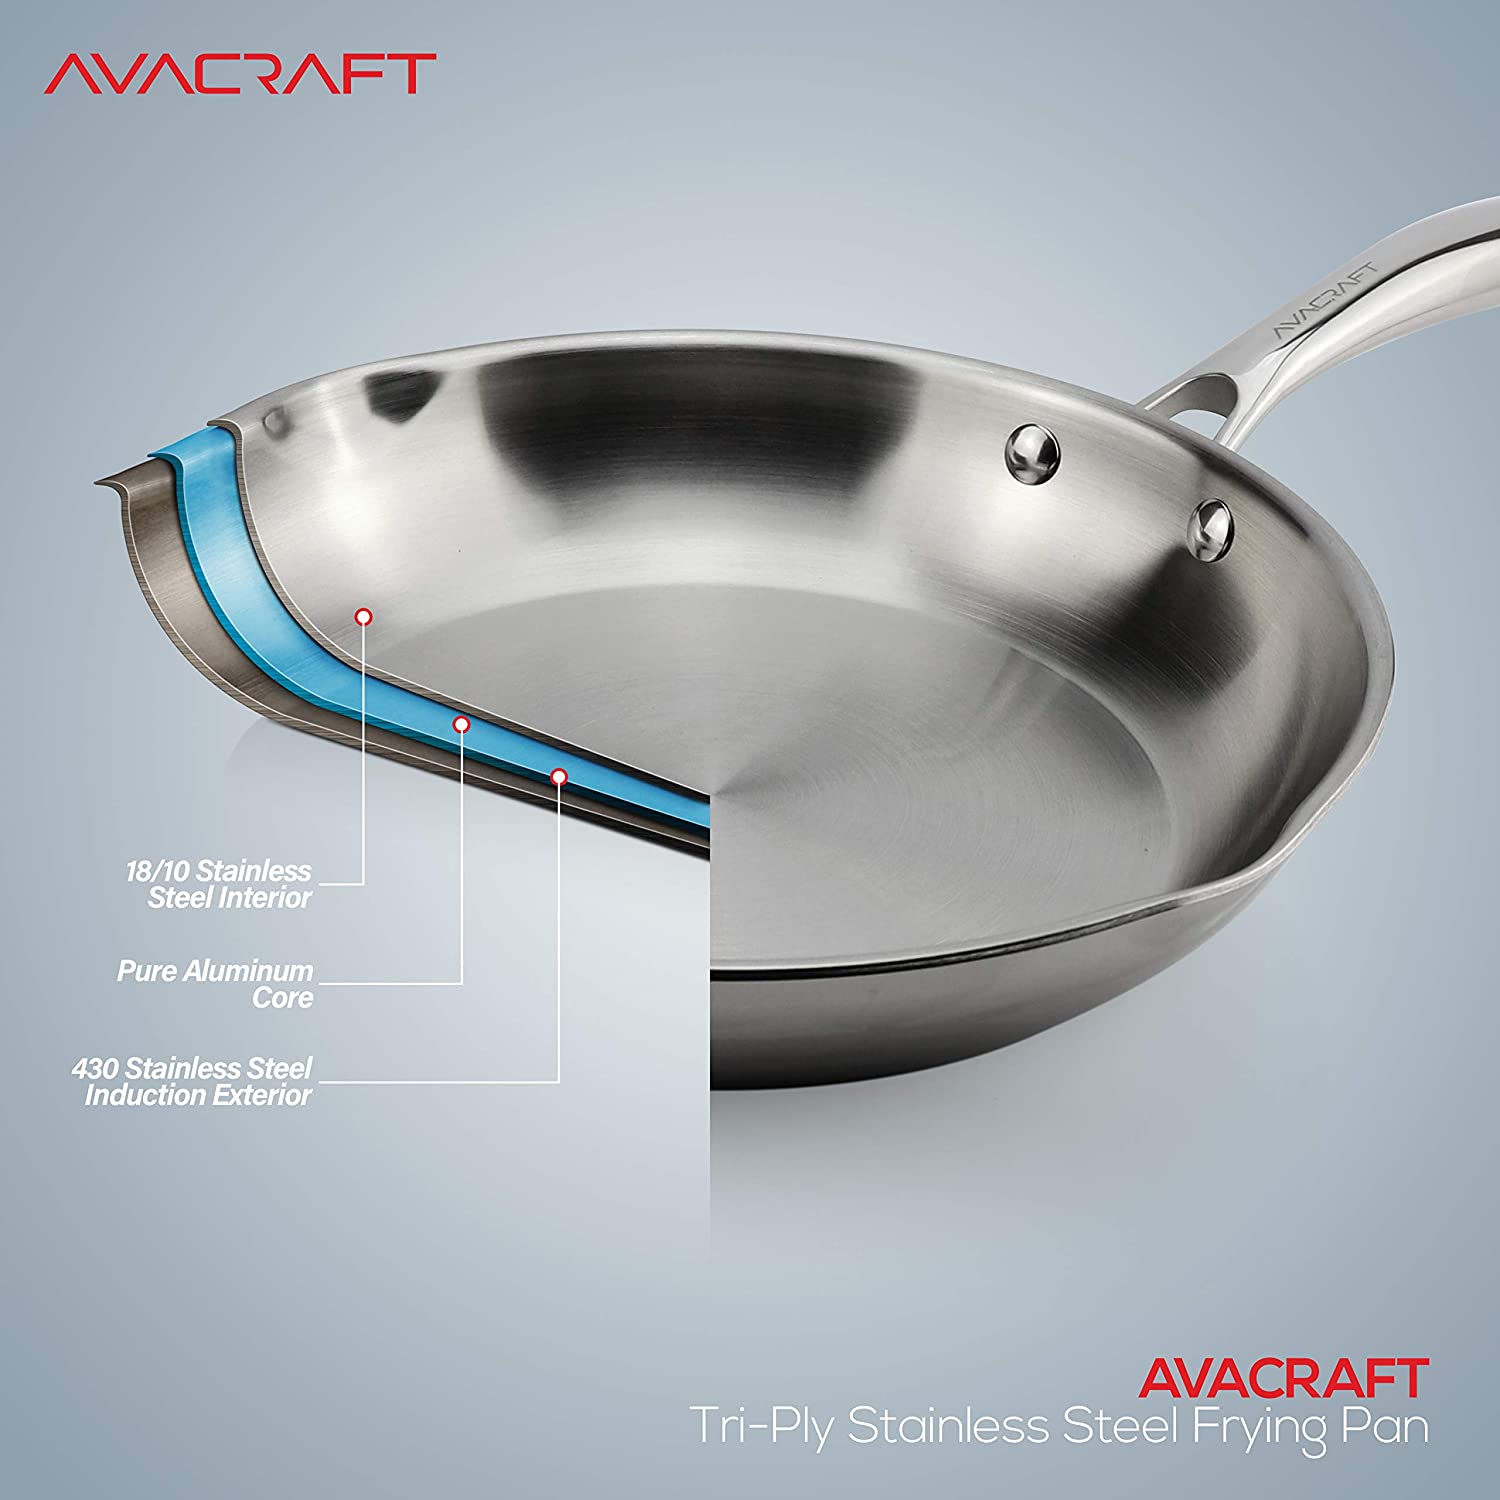 AVACRAFT 18/10 Tri-Ply Stainless Steel Frying Pan with Lid, Side Spouts, Stay Cool Handle (Tri-Ply Full Body, 8 Inch)